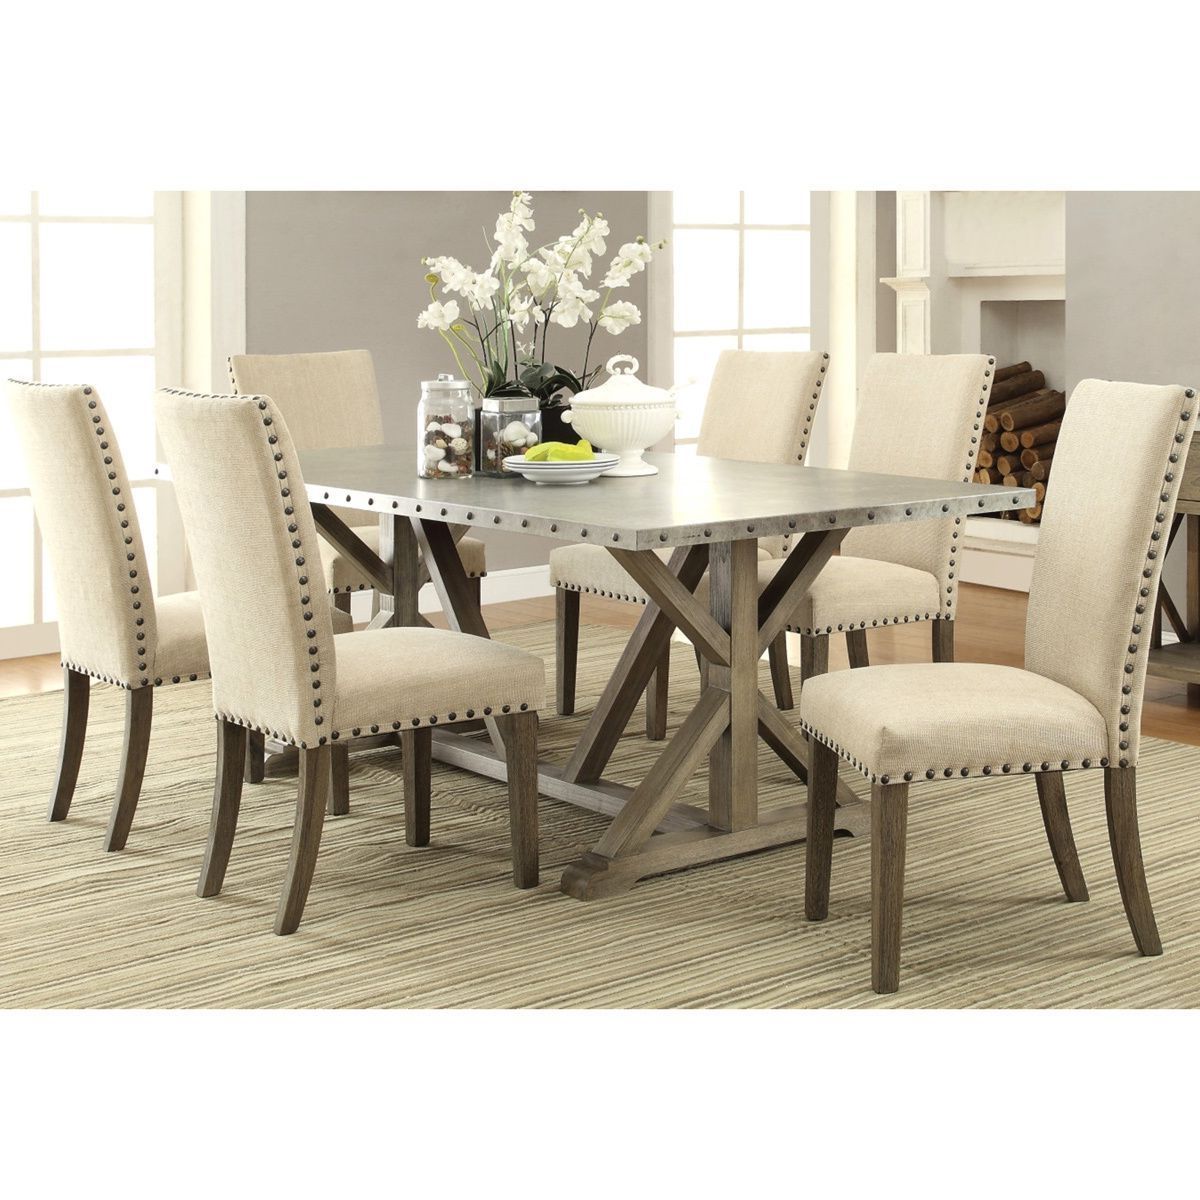 Newest Transitional Driftwood Casual Dining Tables Intended For Rosemarin Transitional Driftwood And Metal Dining Set ( (View 1 of 30)